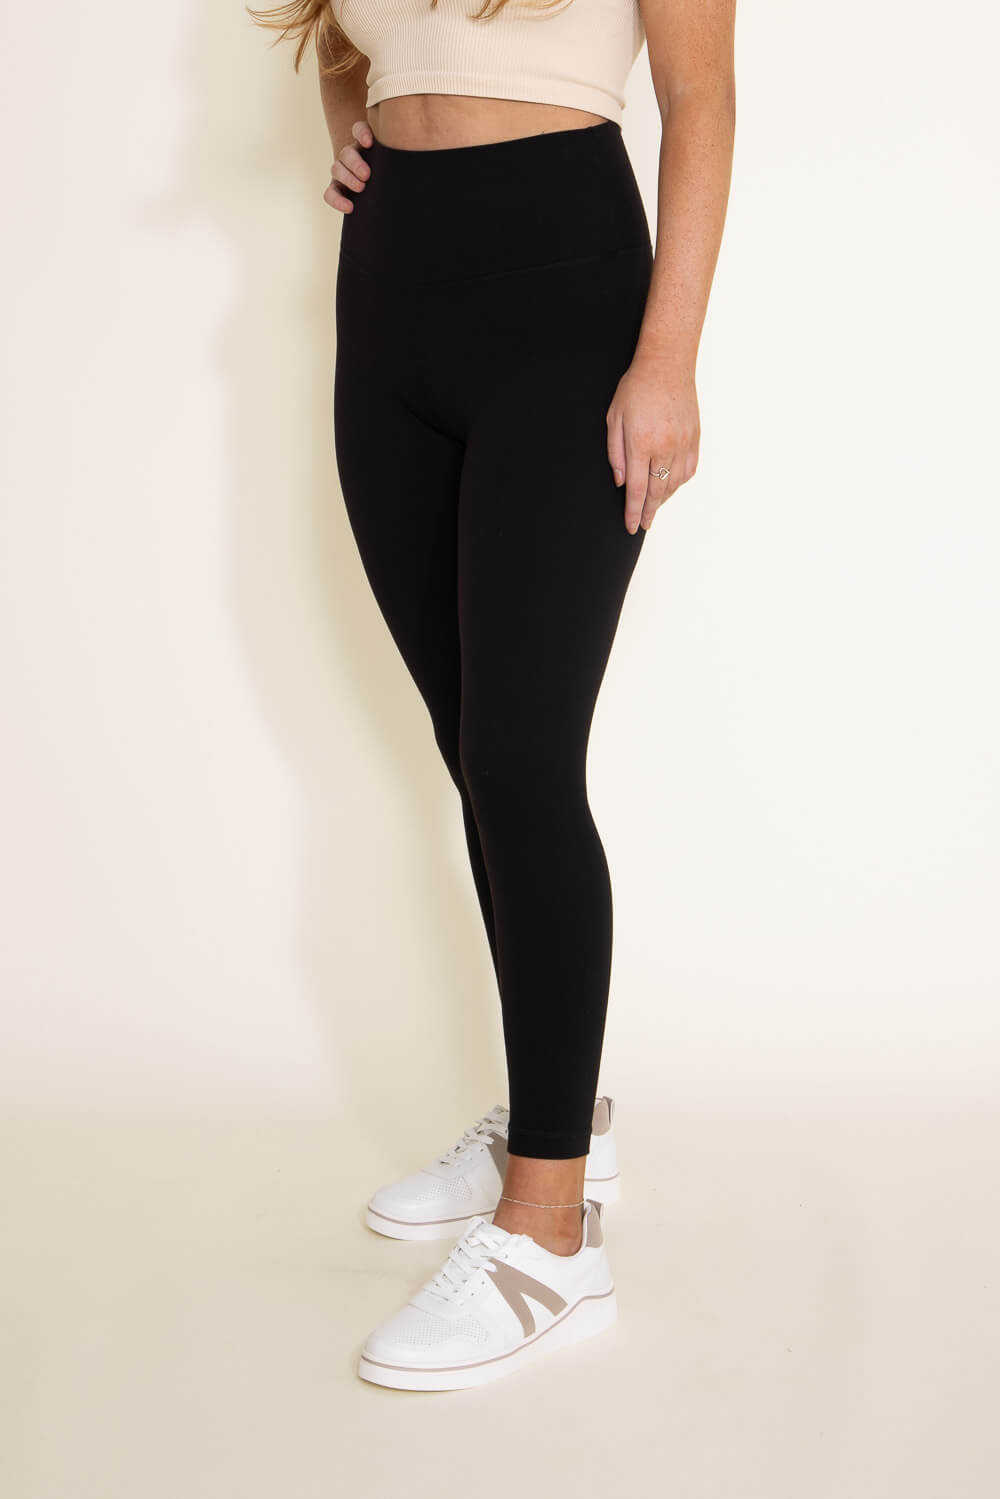 Black High Waisted Leggings  Products For Those With A Passion